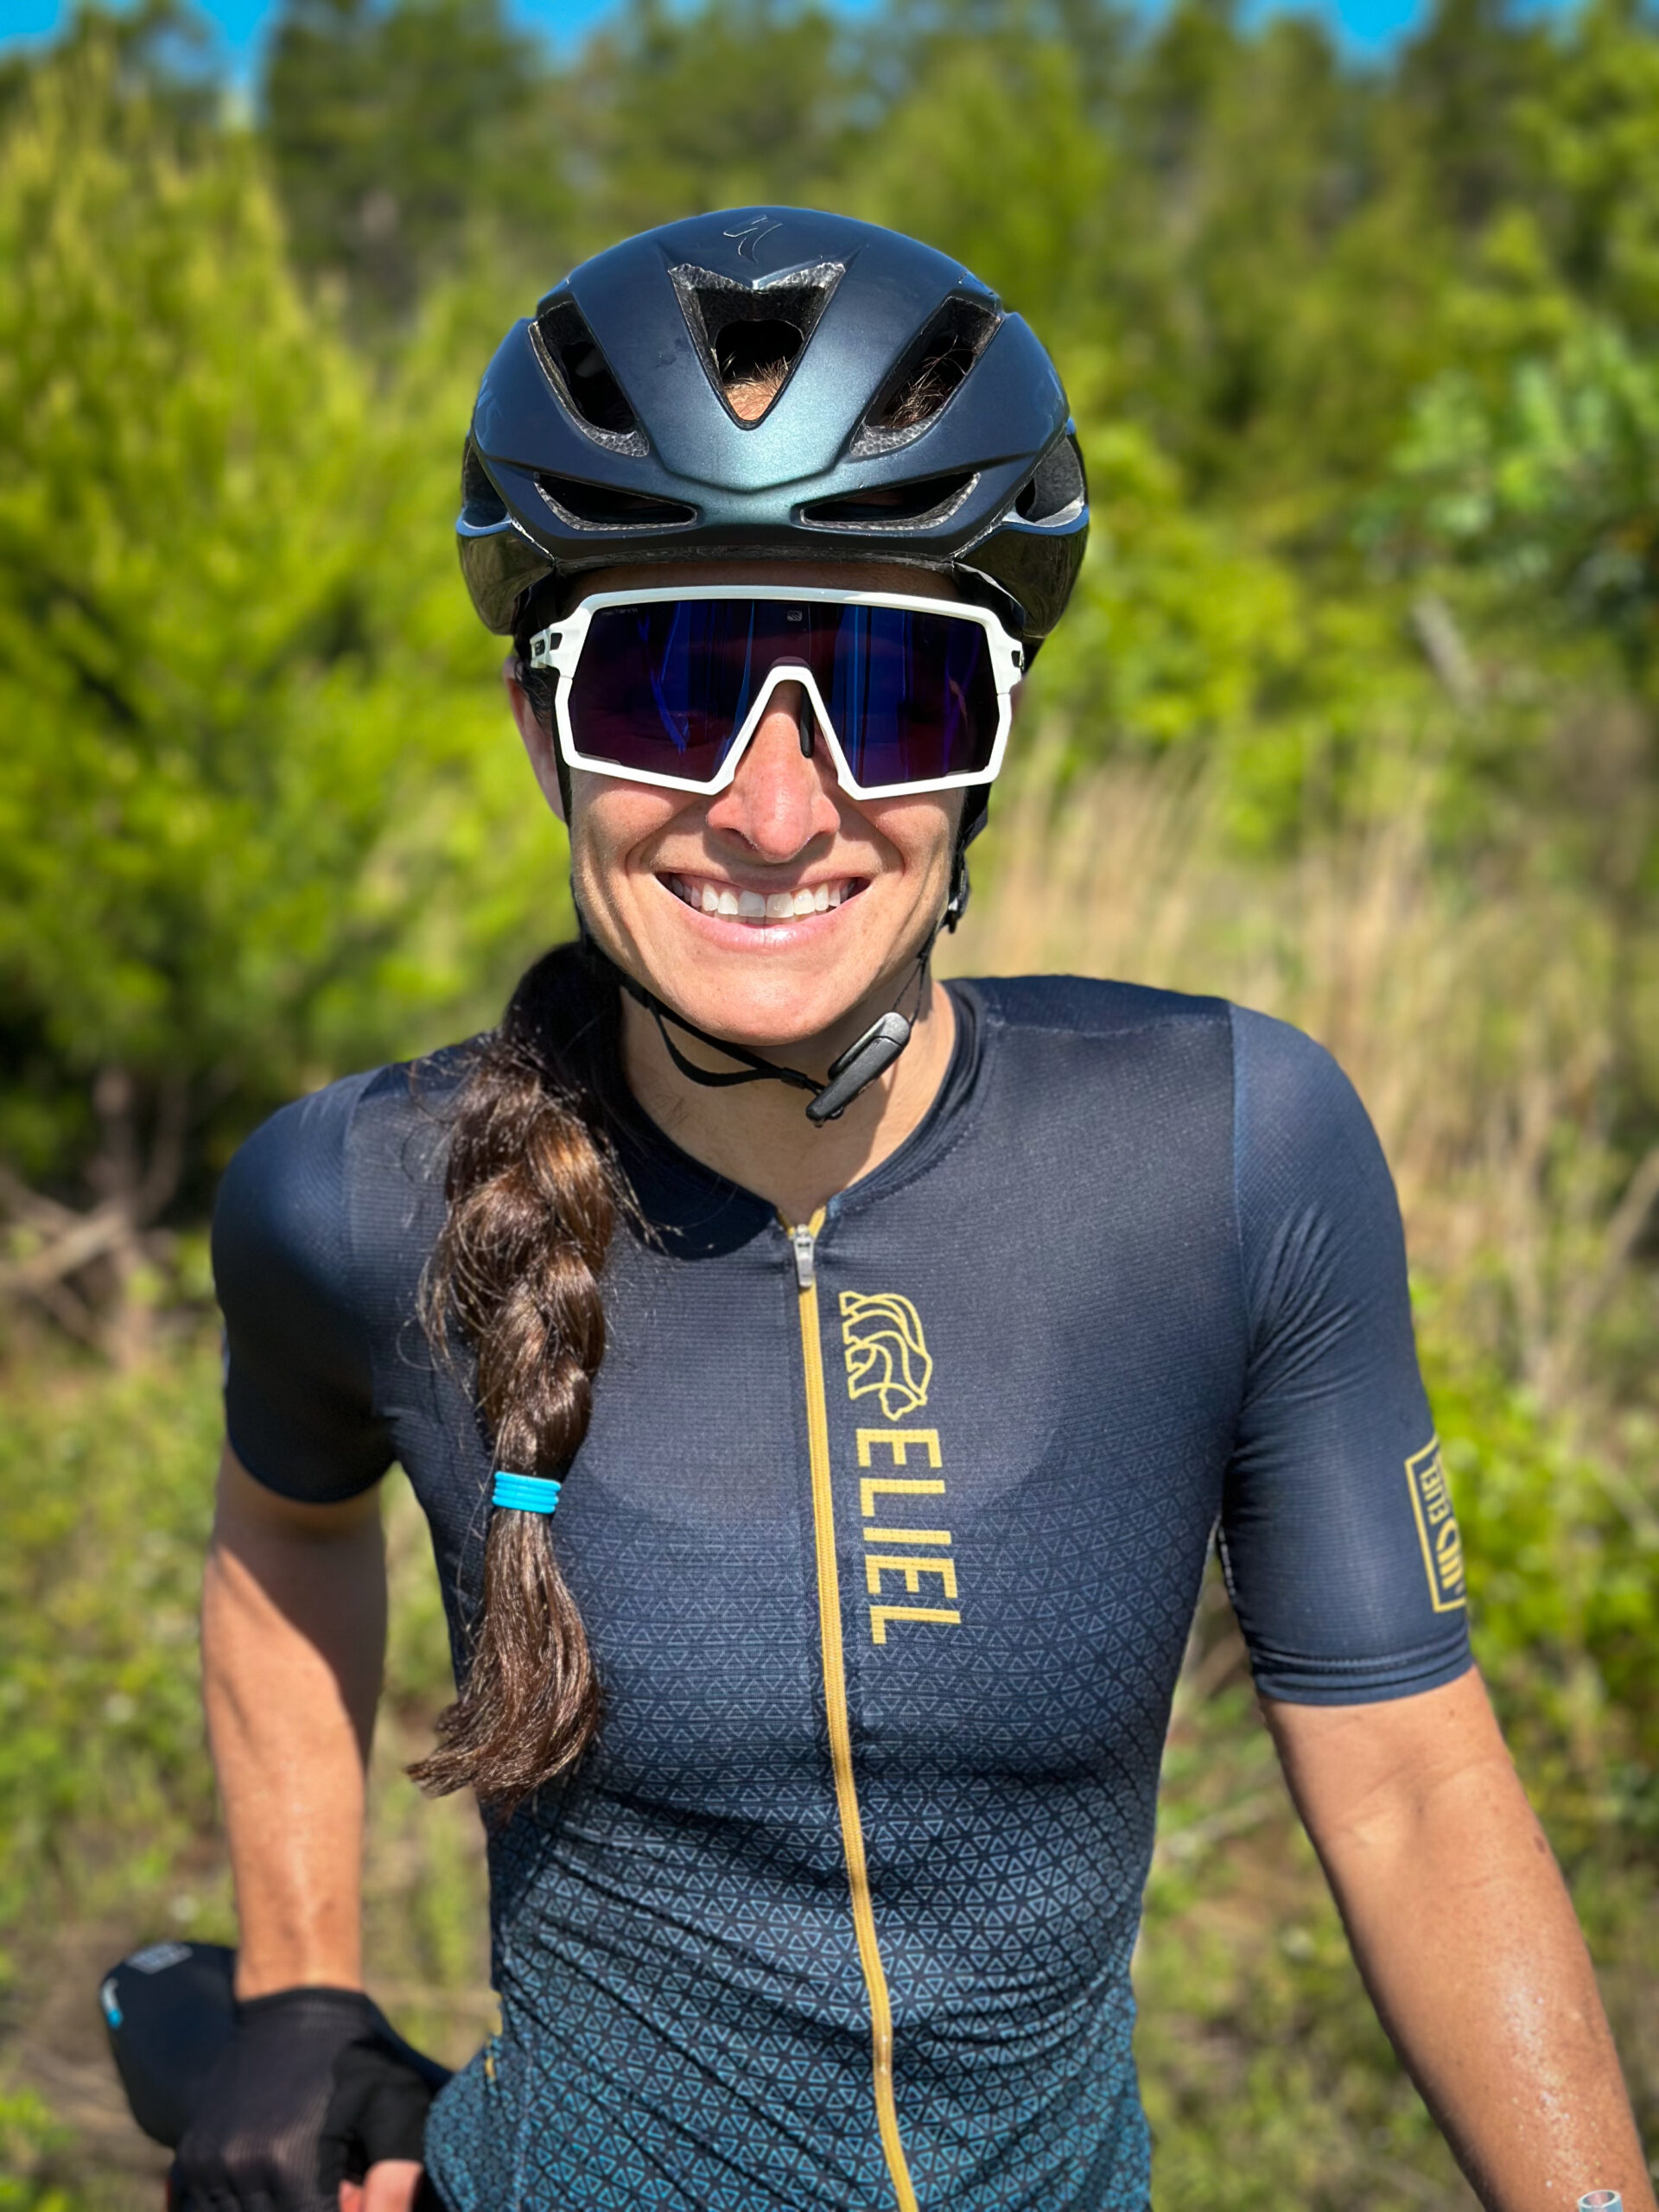 A female triathlete smiling while wearing cool sunglasses